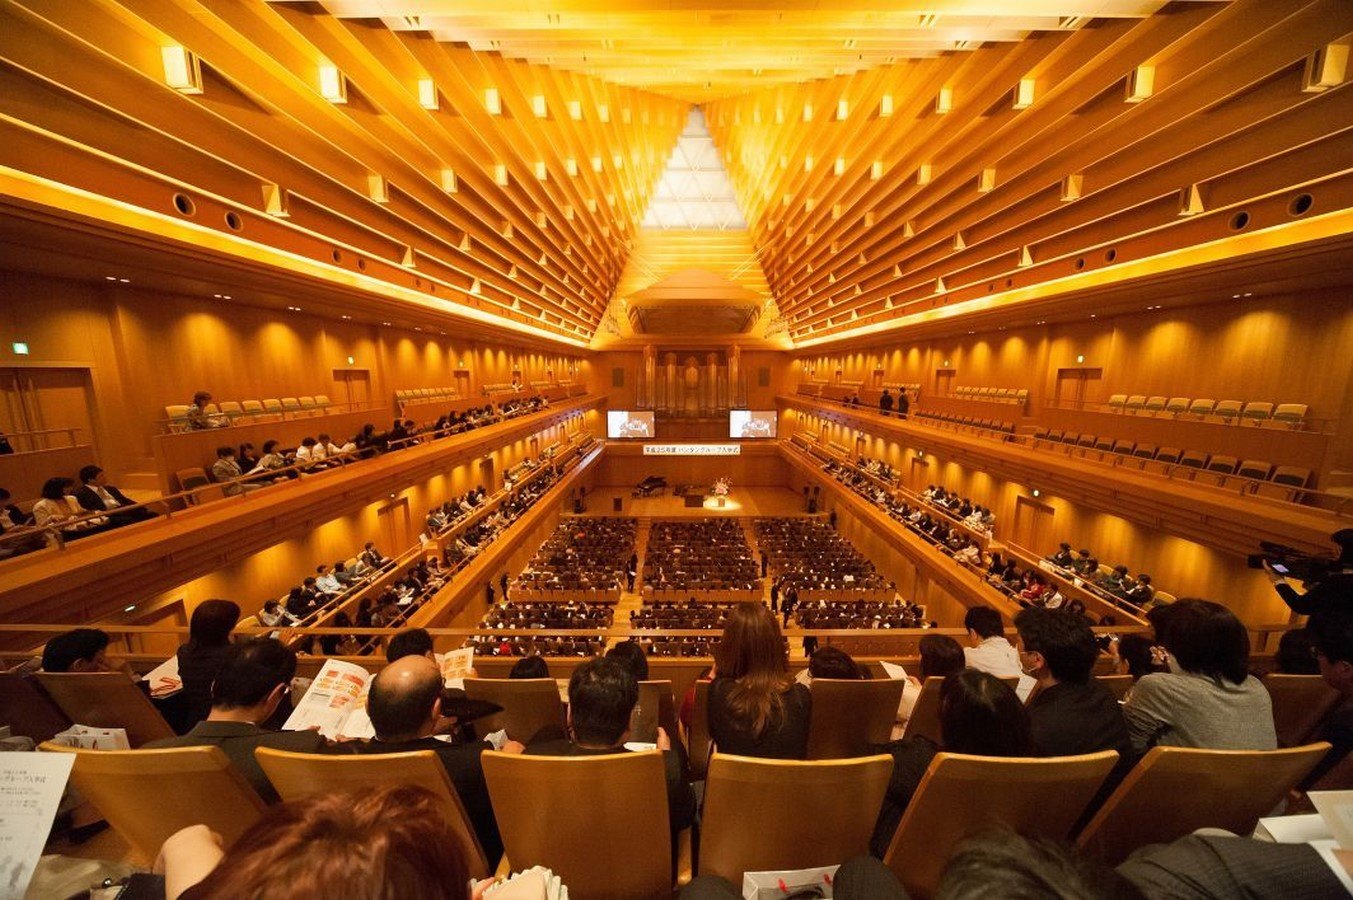 17-astonishing-facts-about-tokyo-opera-city-concert-hall